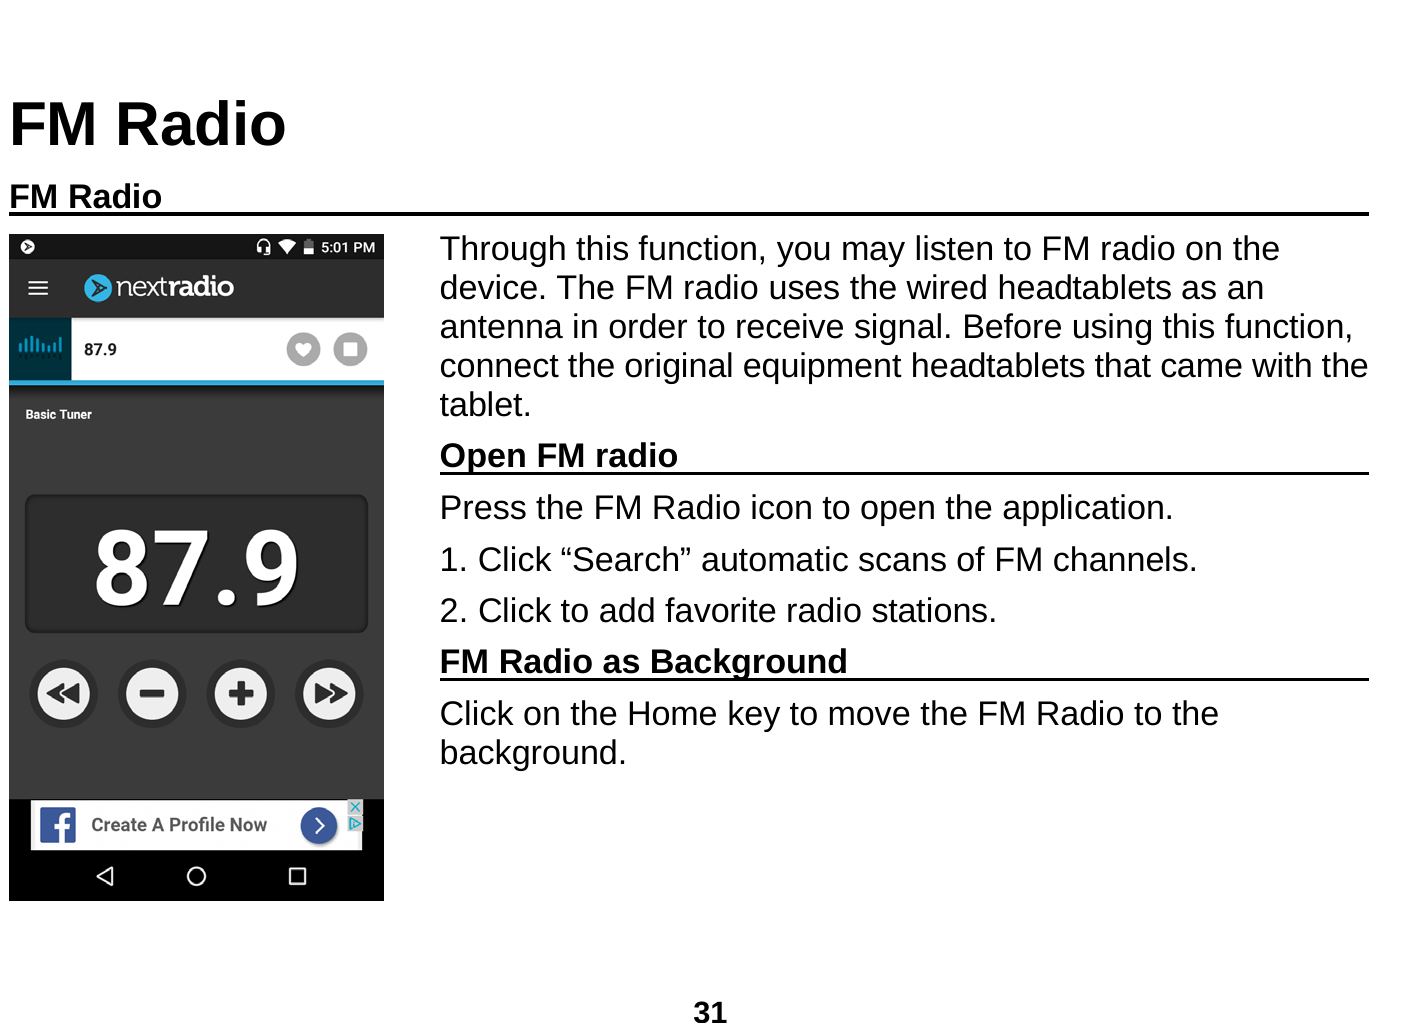  31  FM Radio FM Radio                                                                                    Through this function, you may listen to FM radio on the device. The FM radio uses the wired headtablets as an antenna in order to receive signal. Before using this function, connect the original equipment headtablets that came with the tablet. Open FM radio                                                      Press the FM Radio icon to open the application. 1. Click “Search” automatic scans of FM channels. 2. Click to add favorite radio stations. FM Radio as Background                                    Click on the Home key to move the FM Radio to the background.  